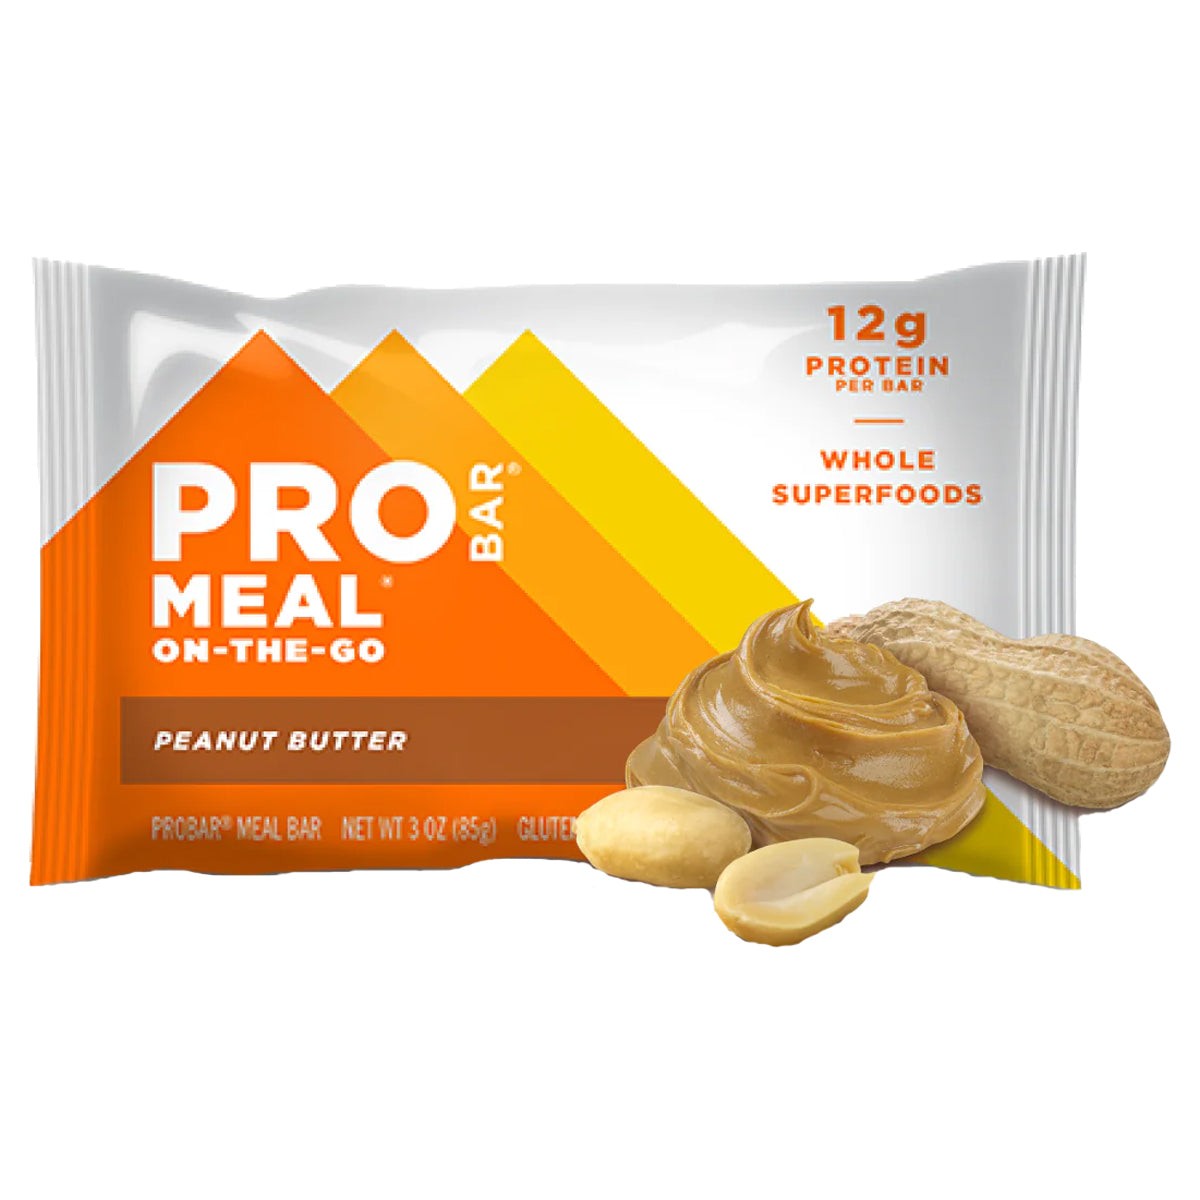 PROBAR Meal Bar in Peanut Butter by GOHUNT | Pro Bar - GOHUNT Shop